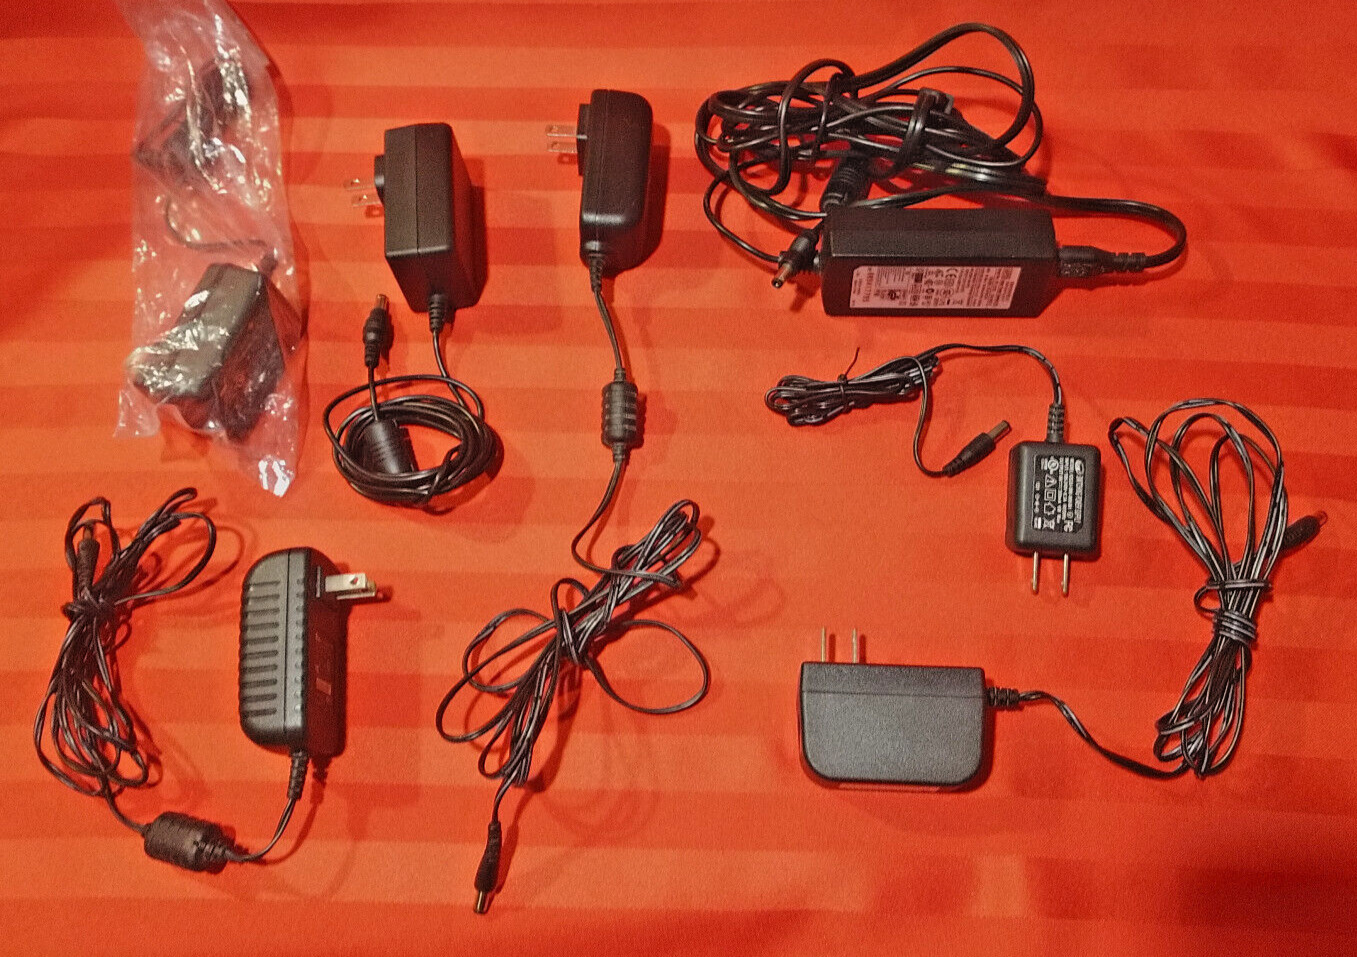 Lot of 7 misc Power Supplies/AC Adapters (6V & 12V outputs). All working. Nice